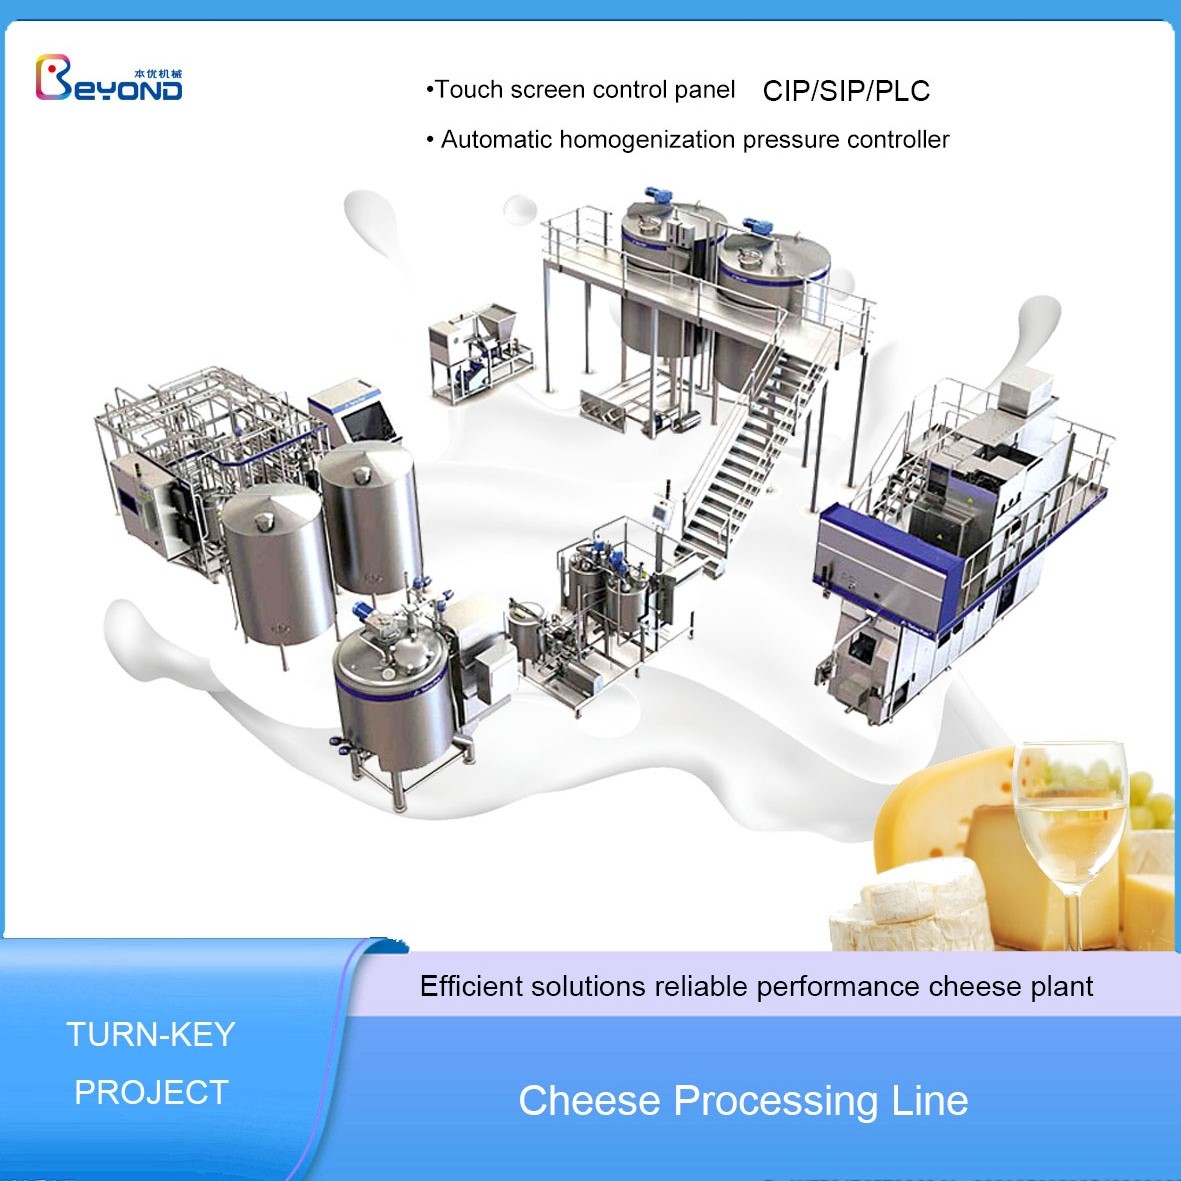 Cheese Processing Line